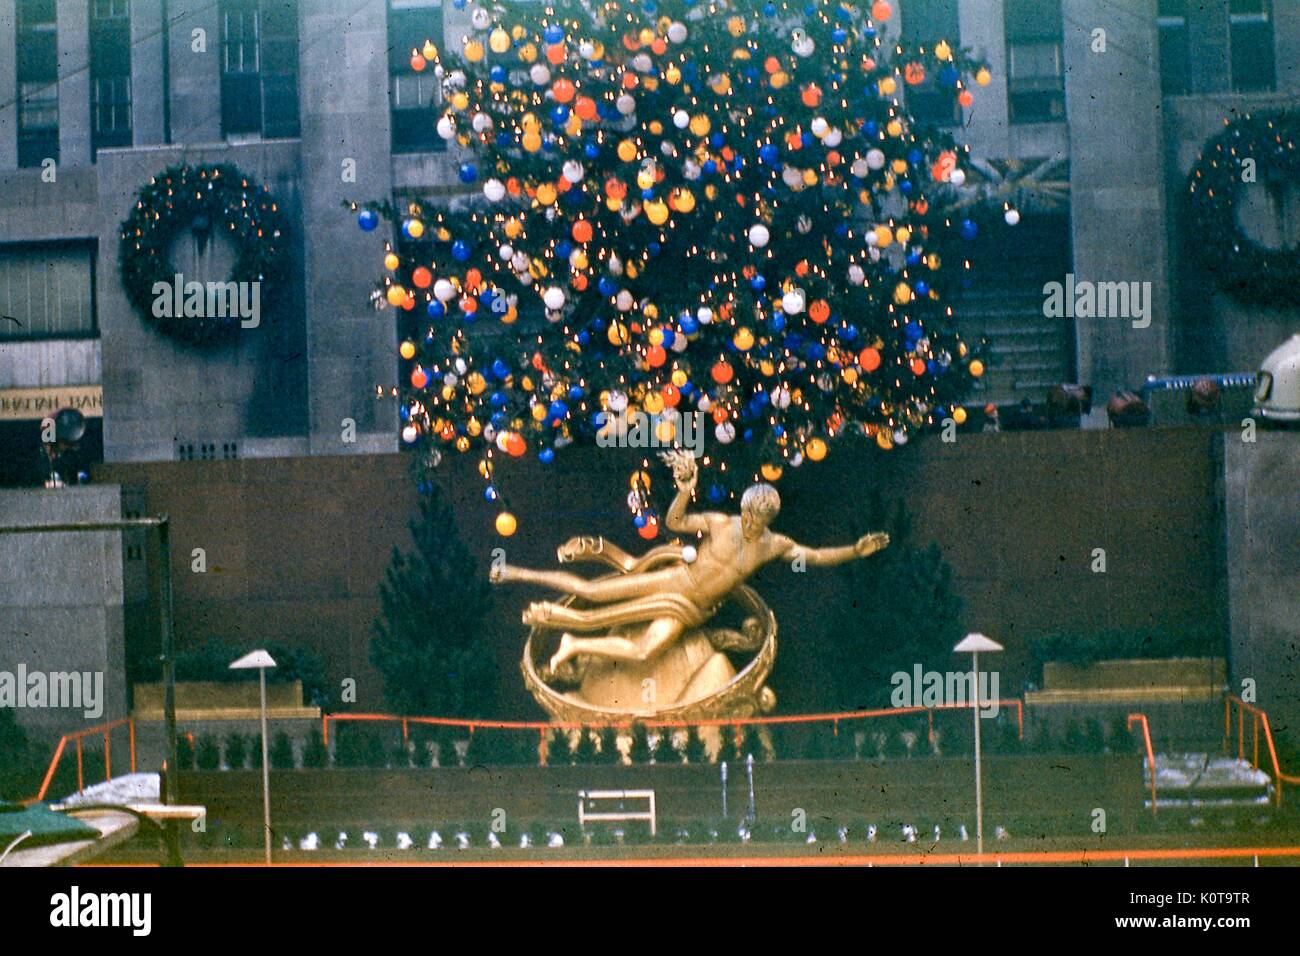 View of Prometheus, the gilded bronze statue by sculptor Paul Manship, reclining beneath the Christmas tree at Rockefeller Center Plaza, midtown Manhattan, New York City, December, 1955. Stock Photo